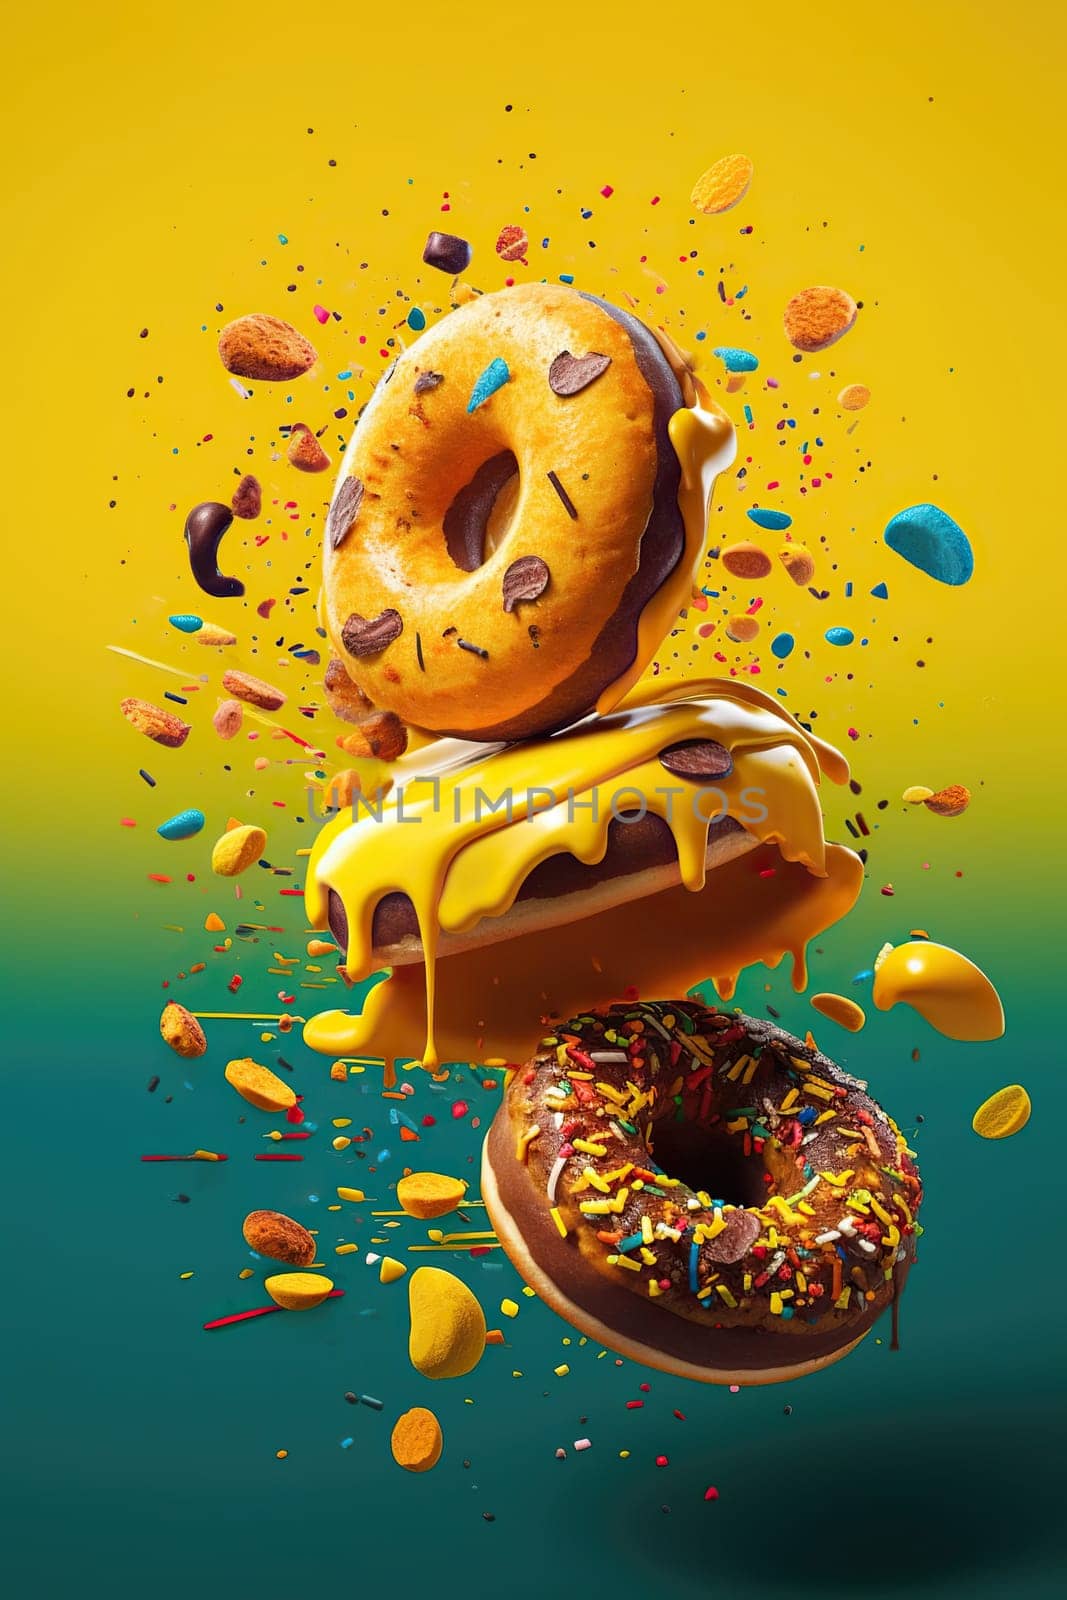 Illustration O Fflying Colorful Donuts by tan4ikk1